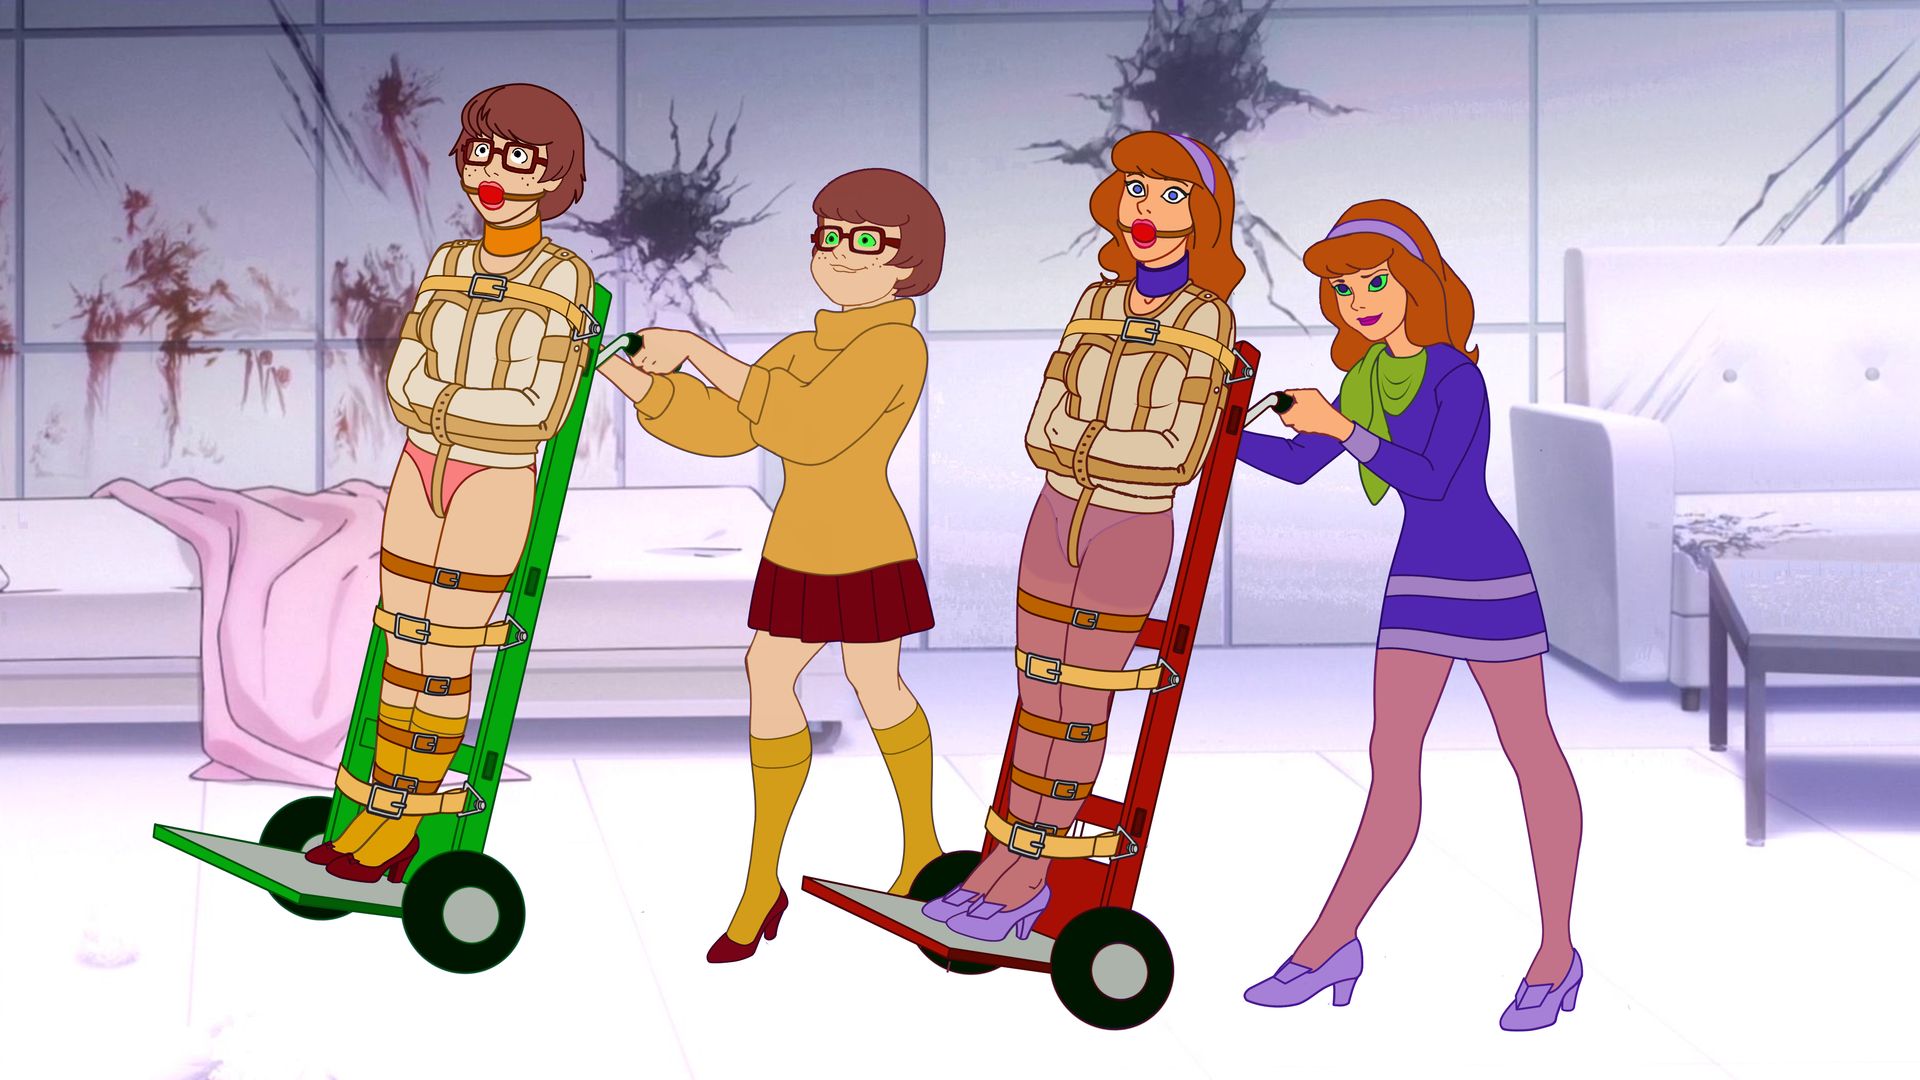 Daphne and Velma in Hands of Evil Doubles.